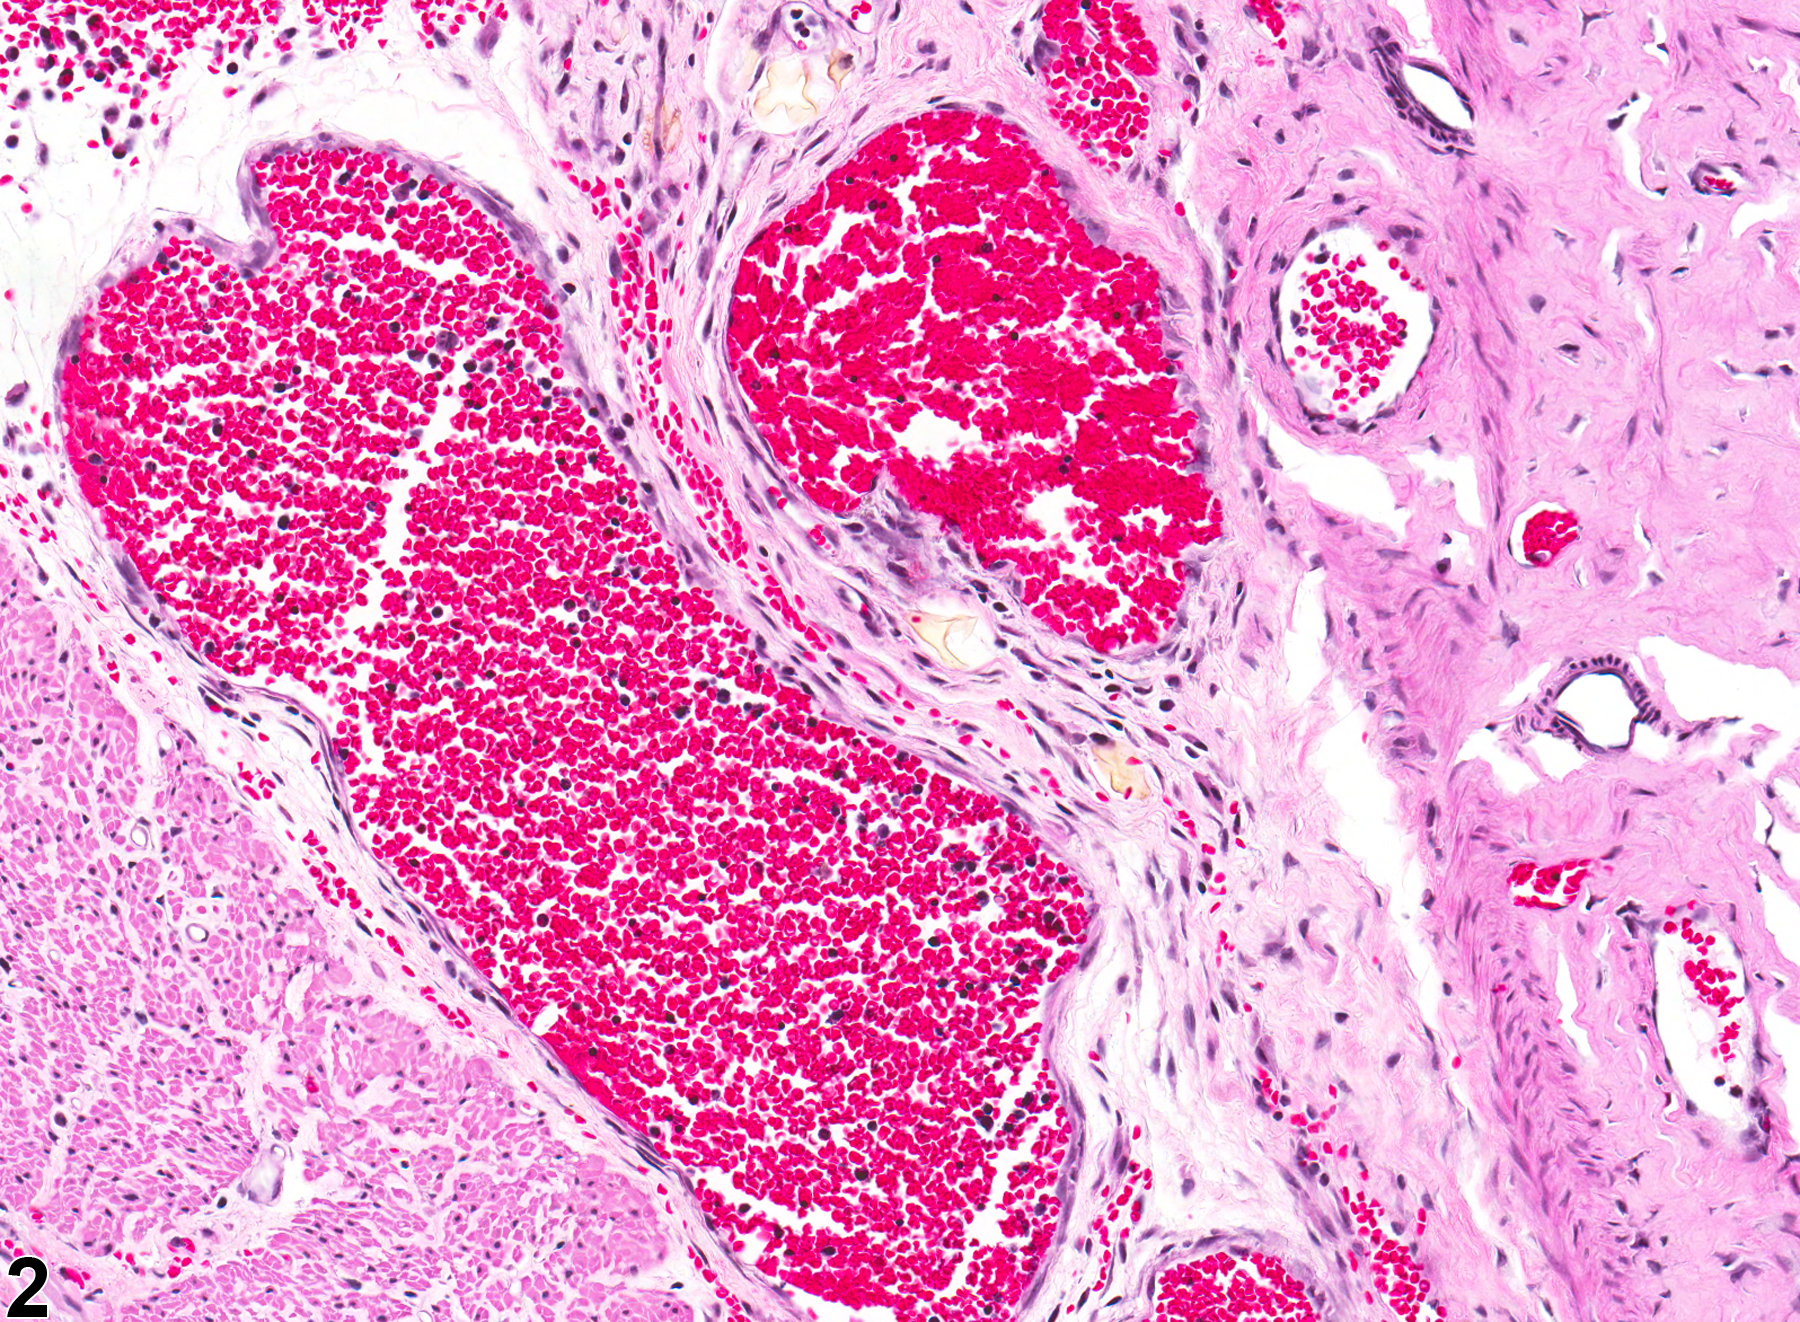 Image of angiectasis in the glandular stomach from a male F344/N rat in a chronic study